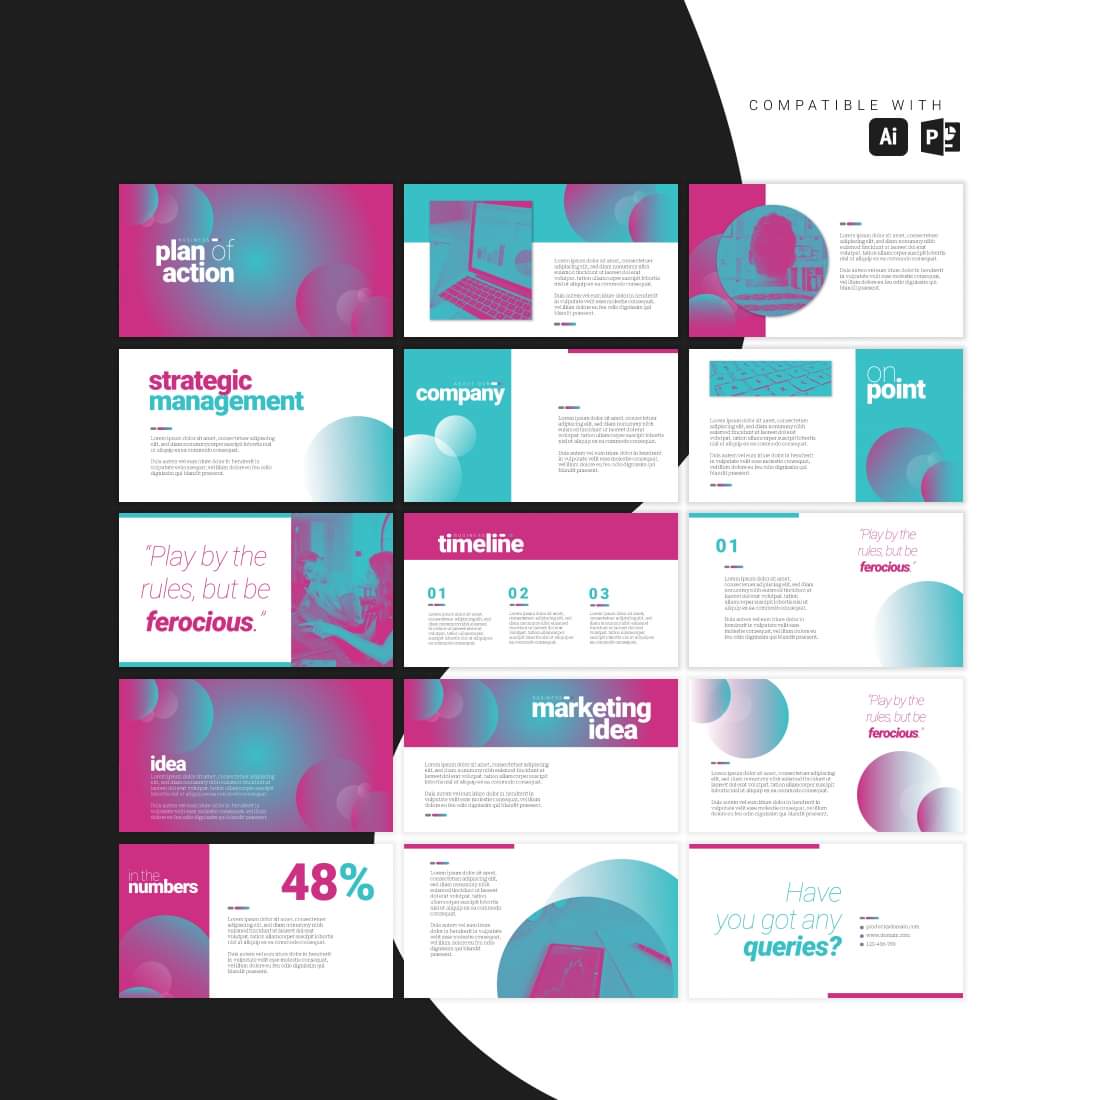 Marketing Presentation Template for PowerPoint and Illustrator cover image.